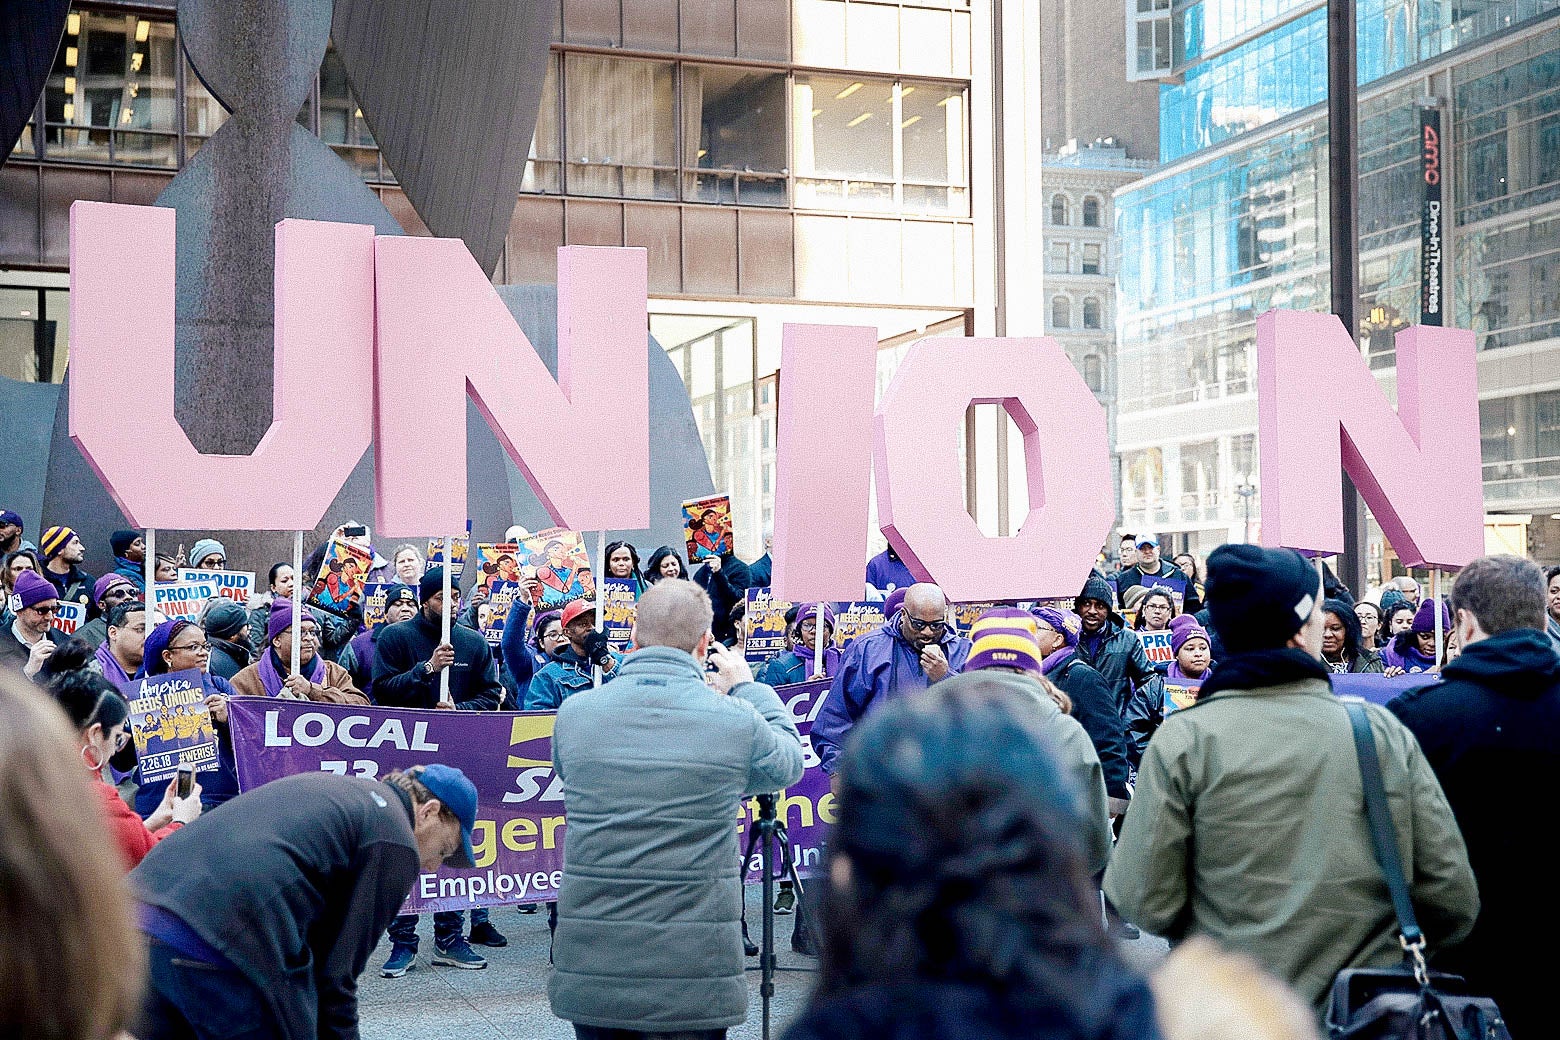 Members of the Service Employees International Union (SEIU) hold a rally in support of the American Federation of State County and Municipal Employees (AFSCME) union at the Richard J. Daley Center plaza on February 26, 2018 in Chicago, Illinois. 